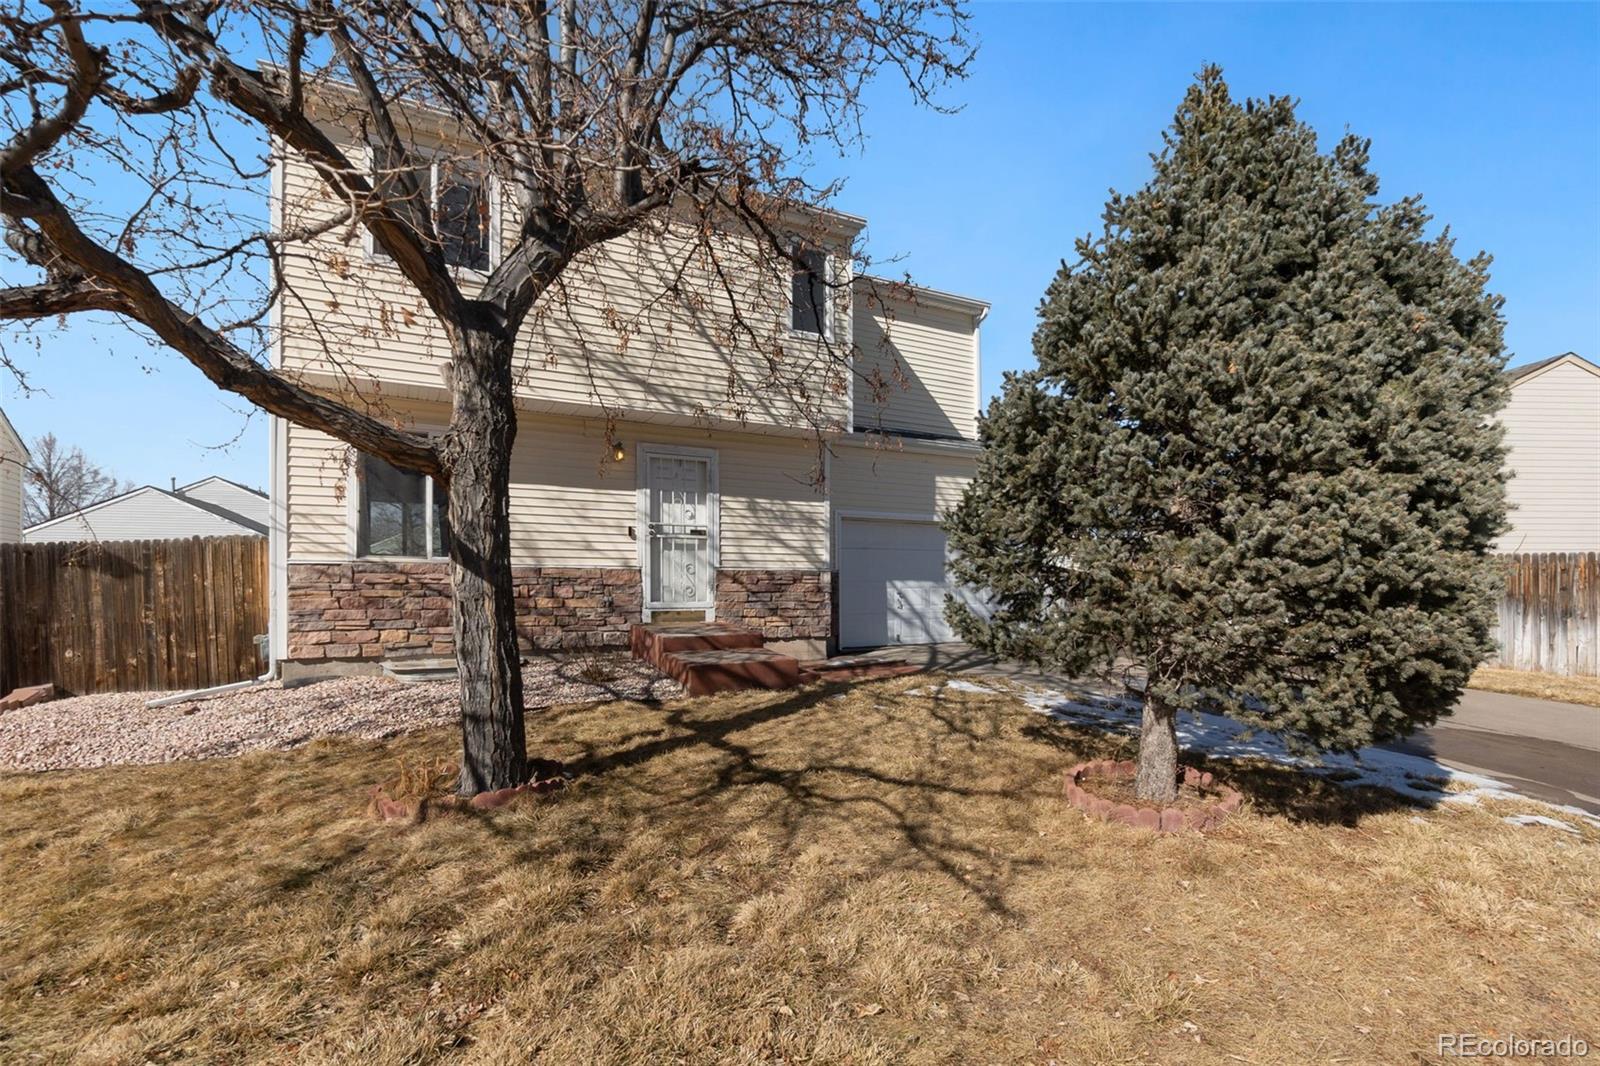 Report Image for 1425 S Pitkin Court,Aurora, Colorado